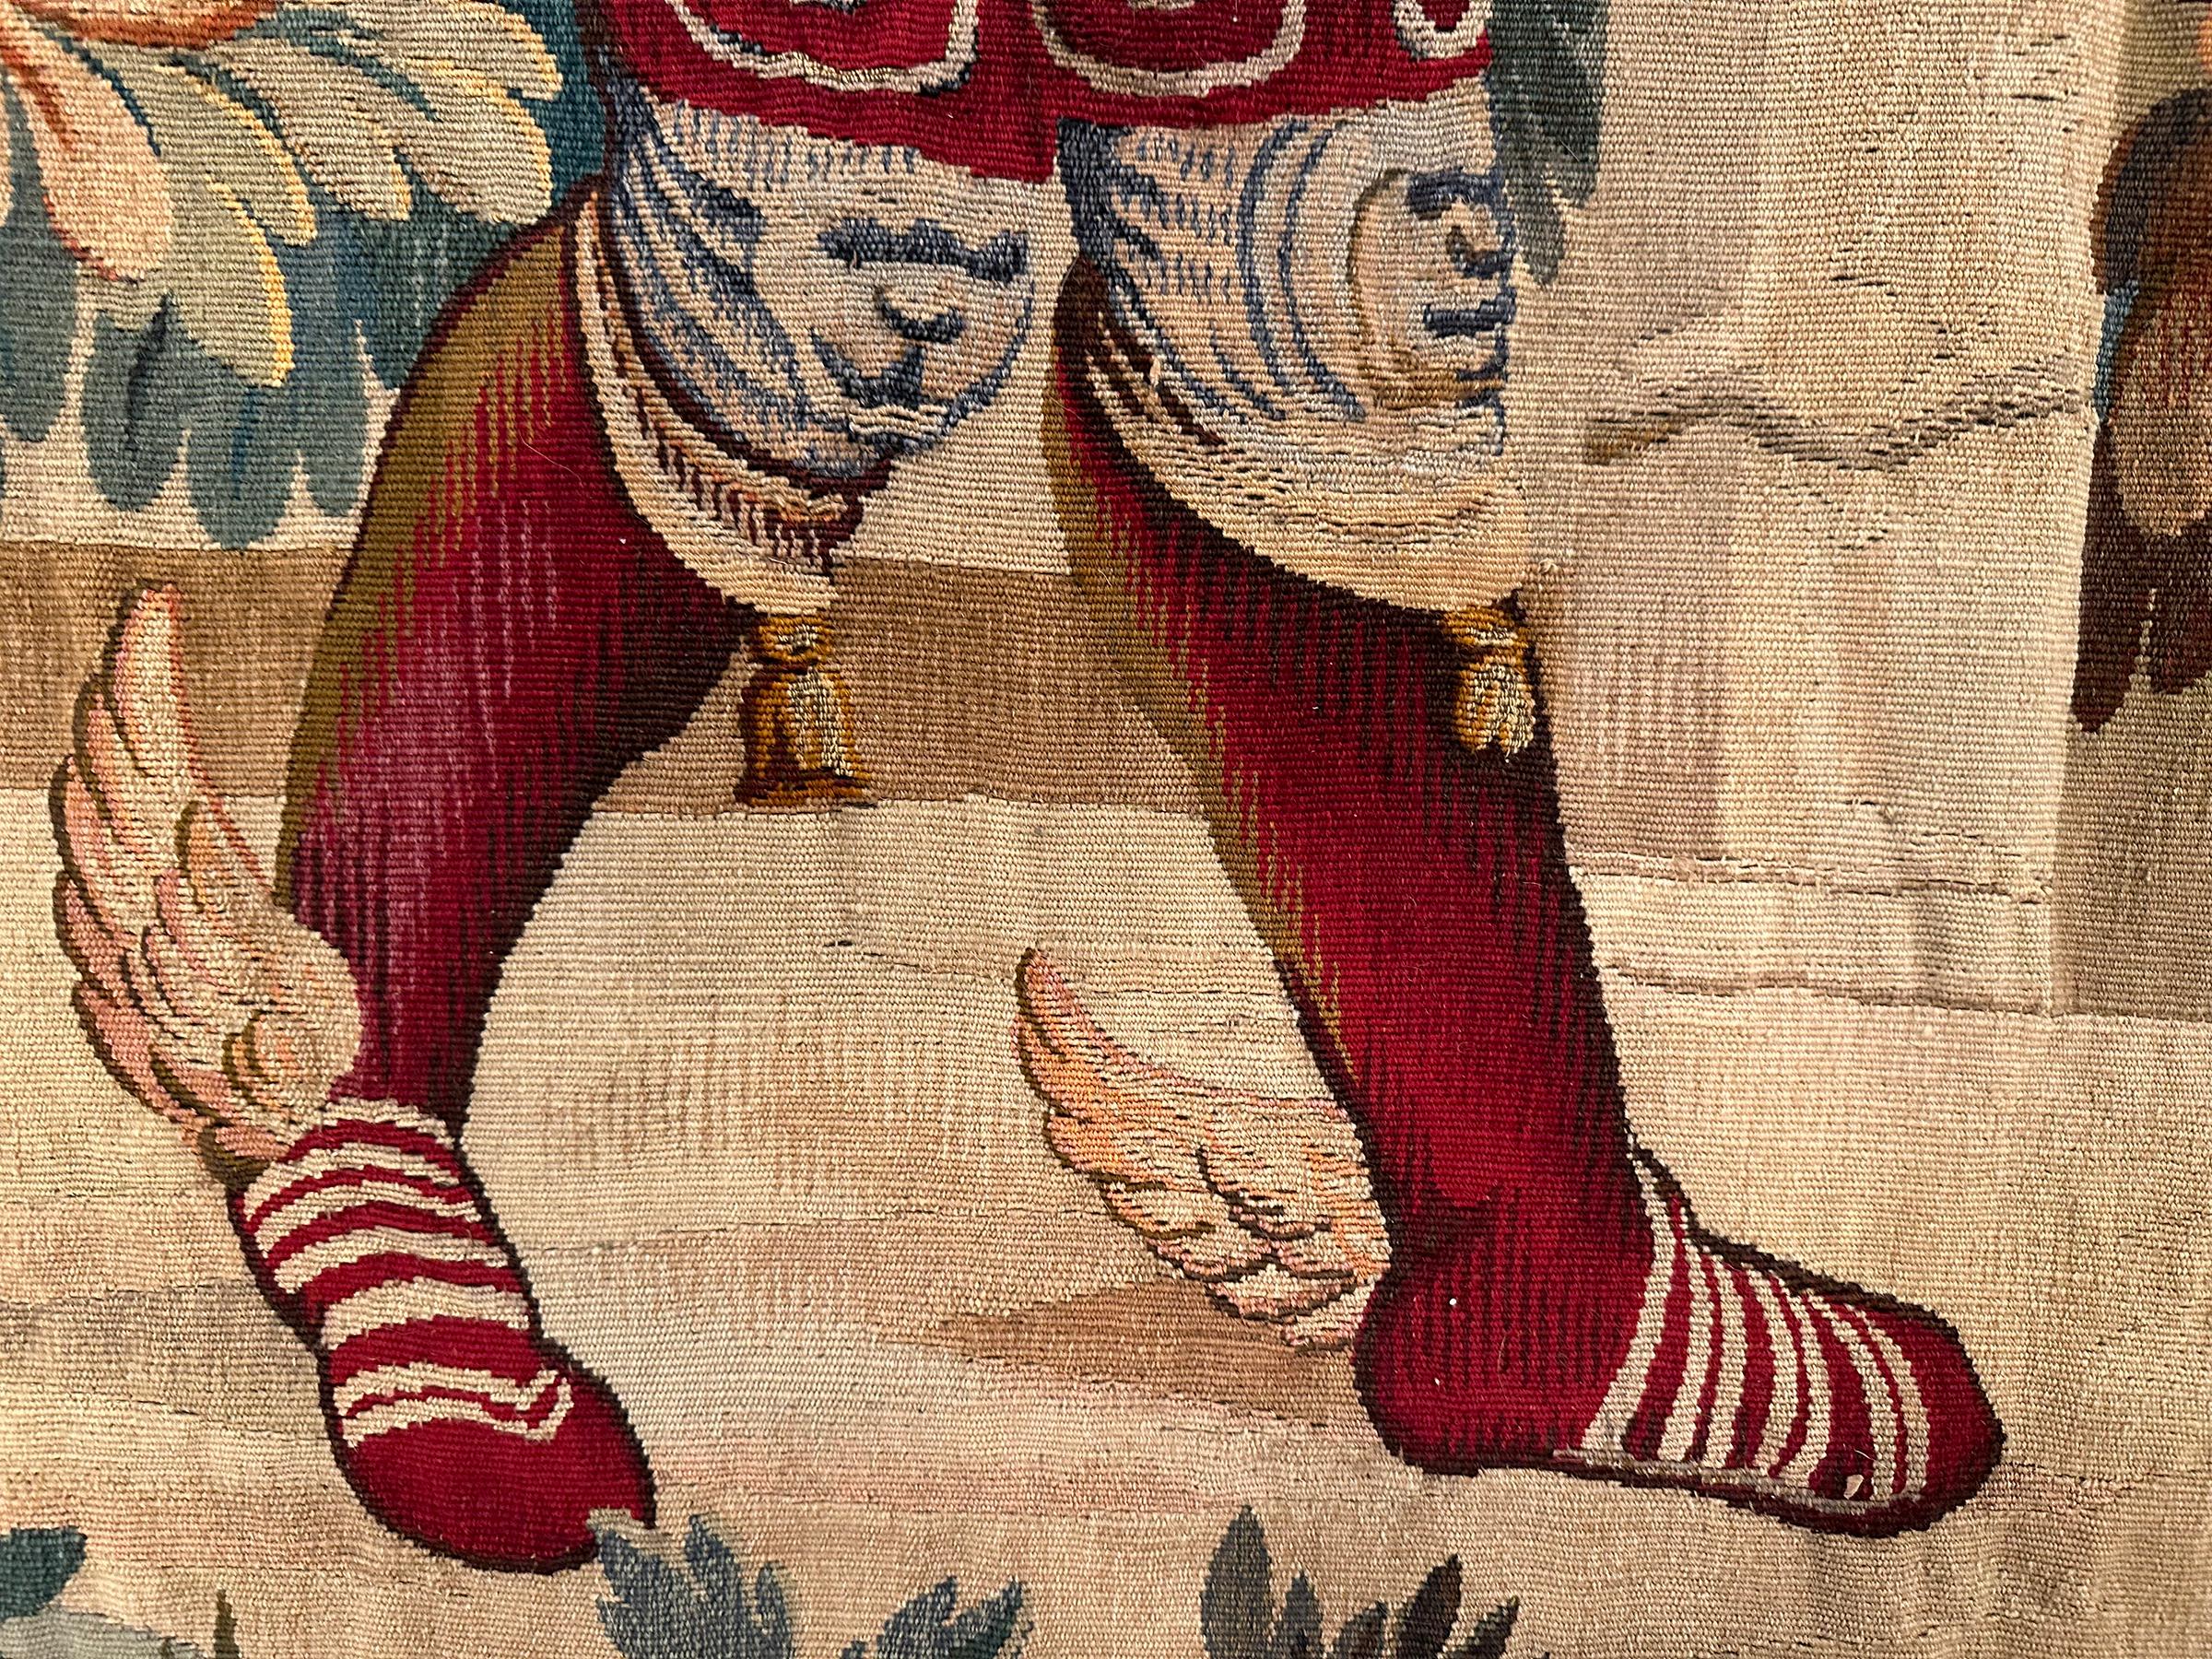 Antique French Aubusson Tapestry Hermes Mercury Wool & Silk Square 6x6 176x178cm For Sale 3